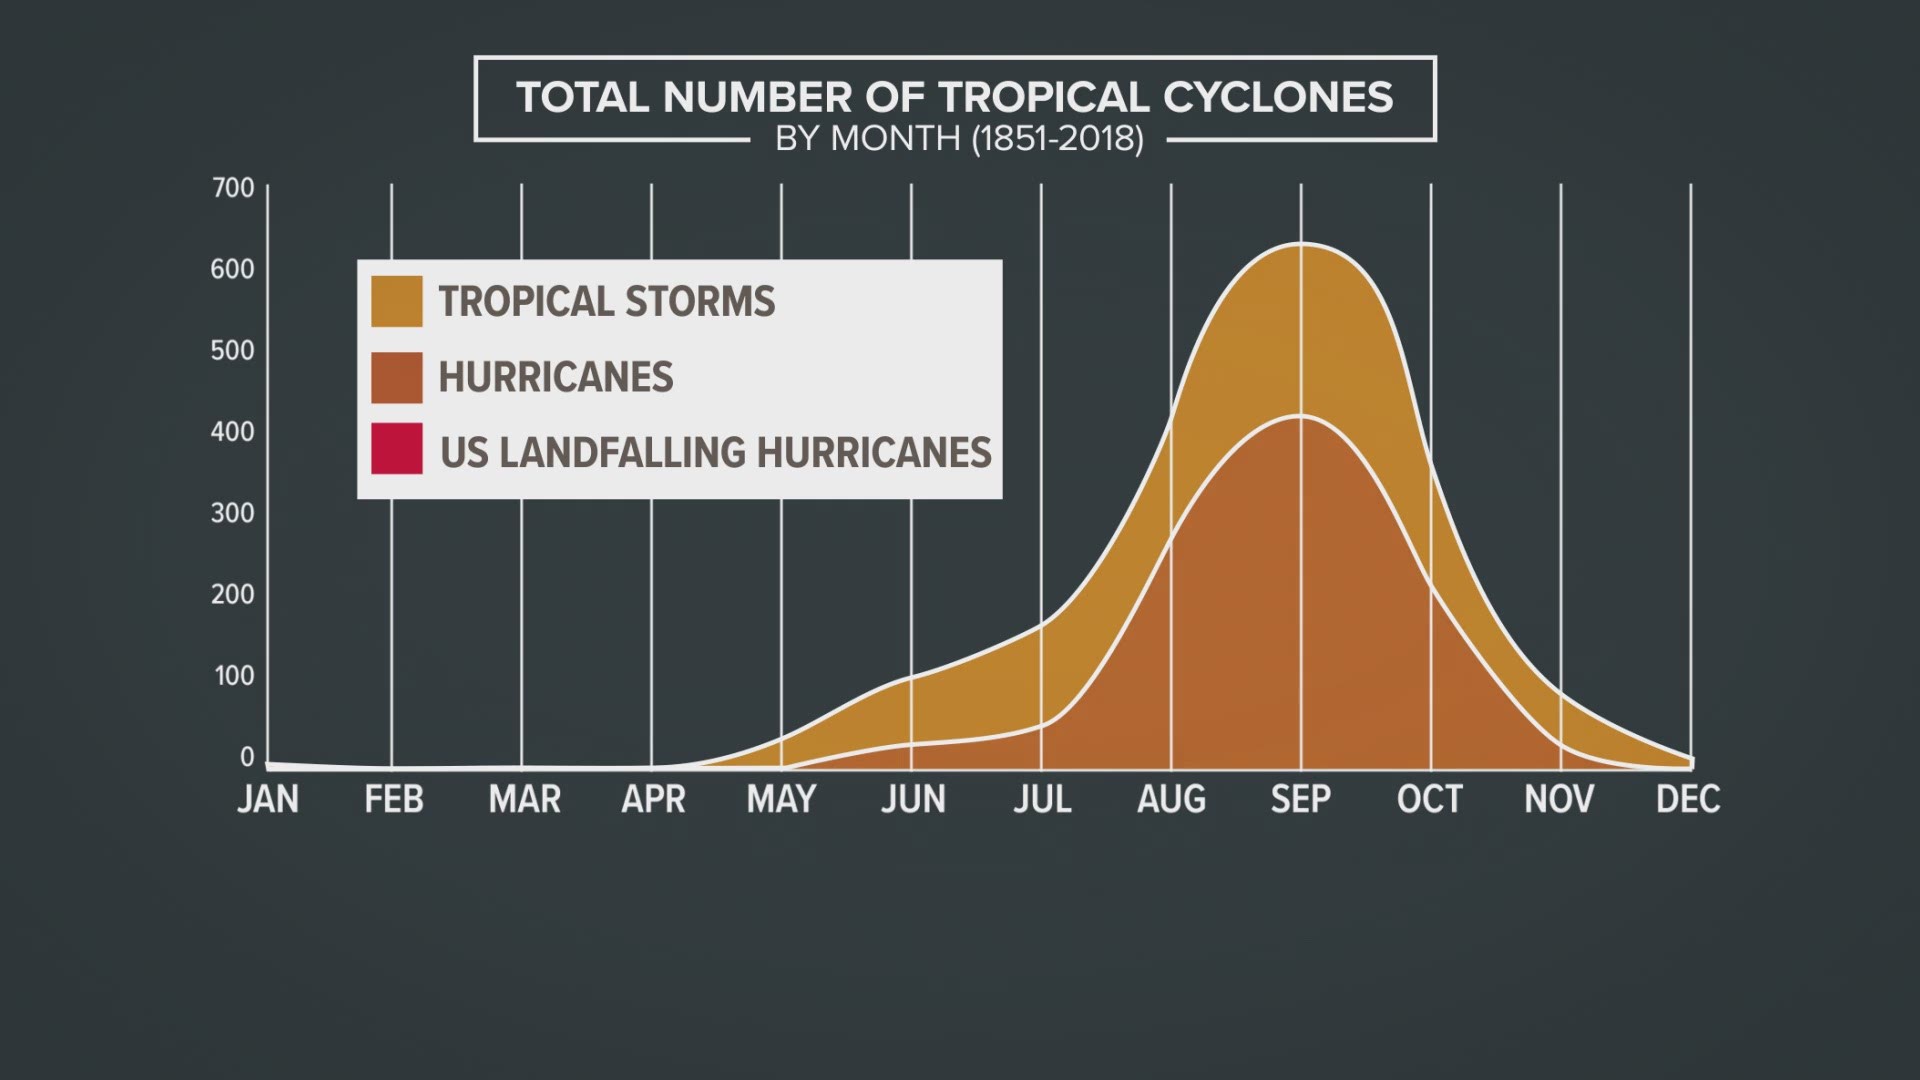 A closer look at total number of tropical cyclones by month